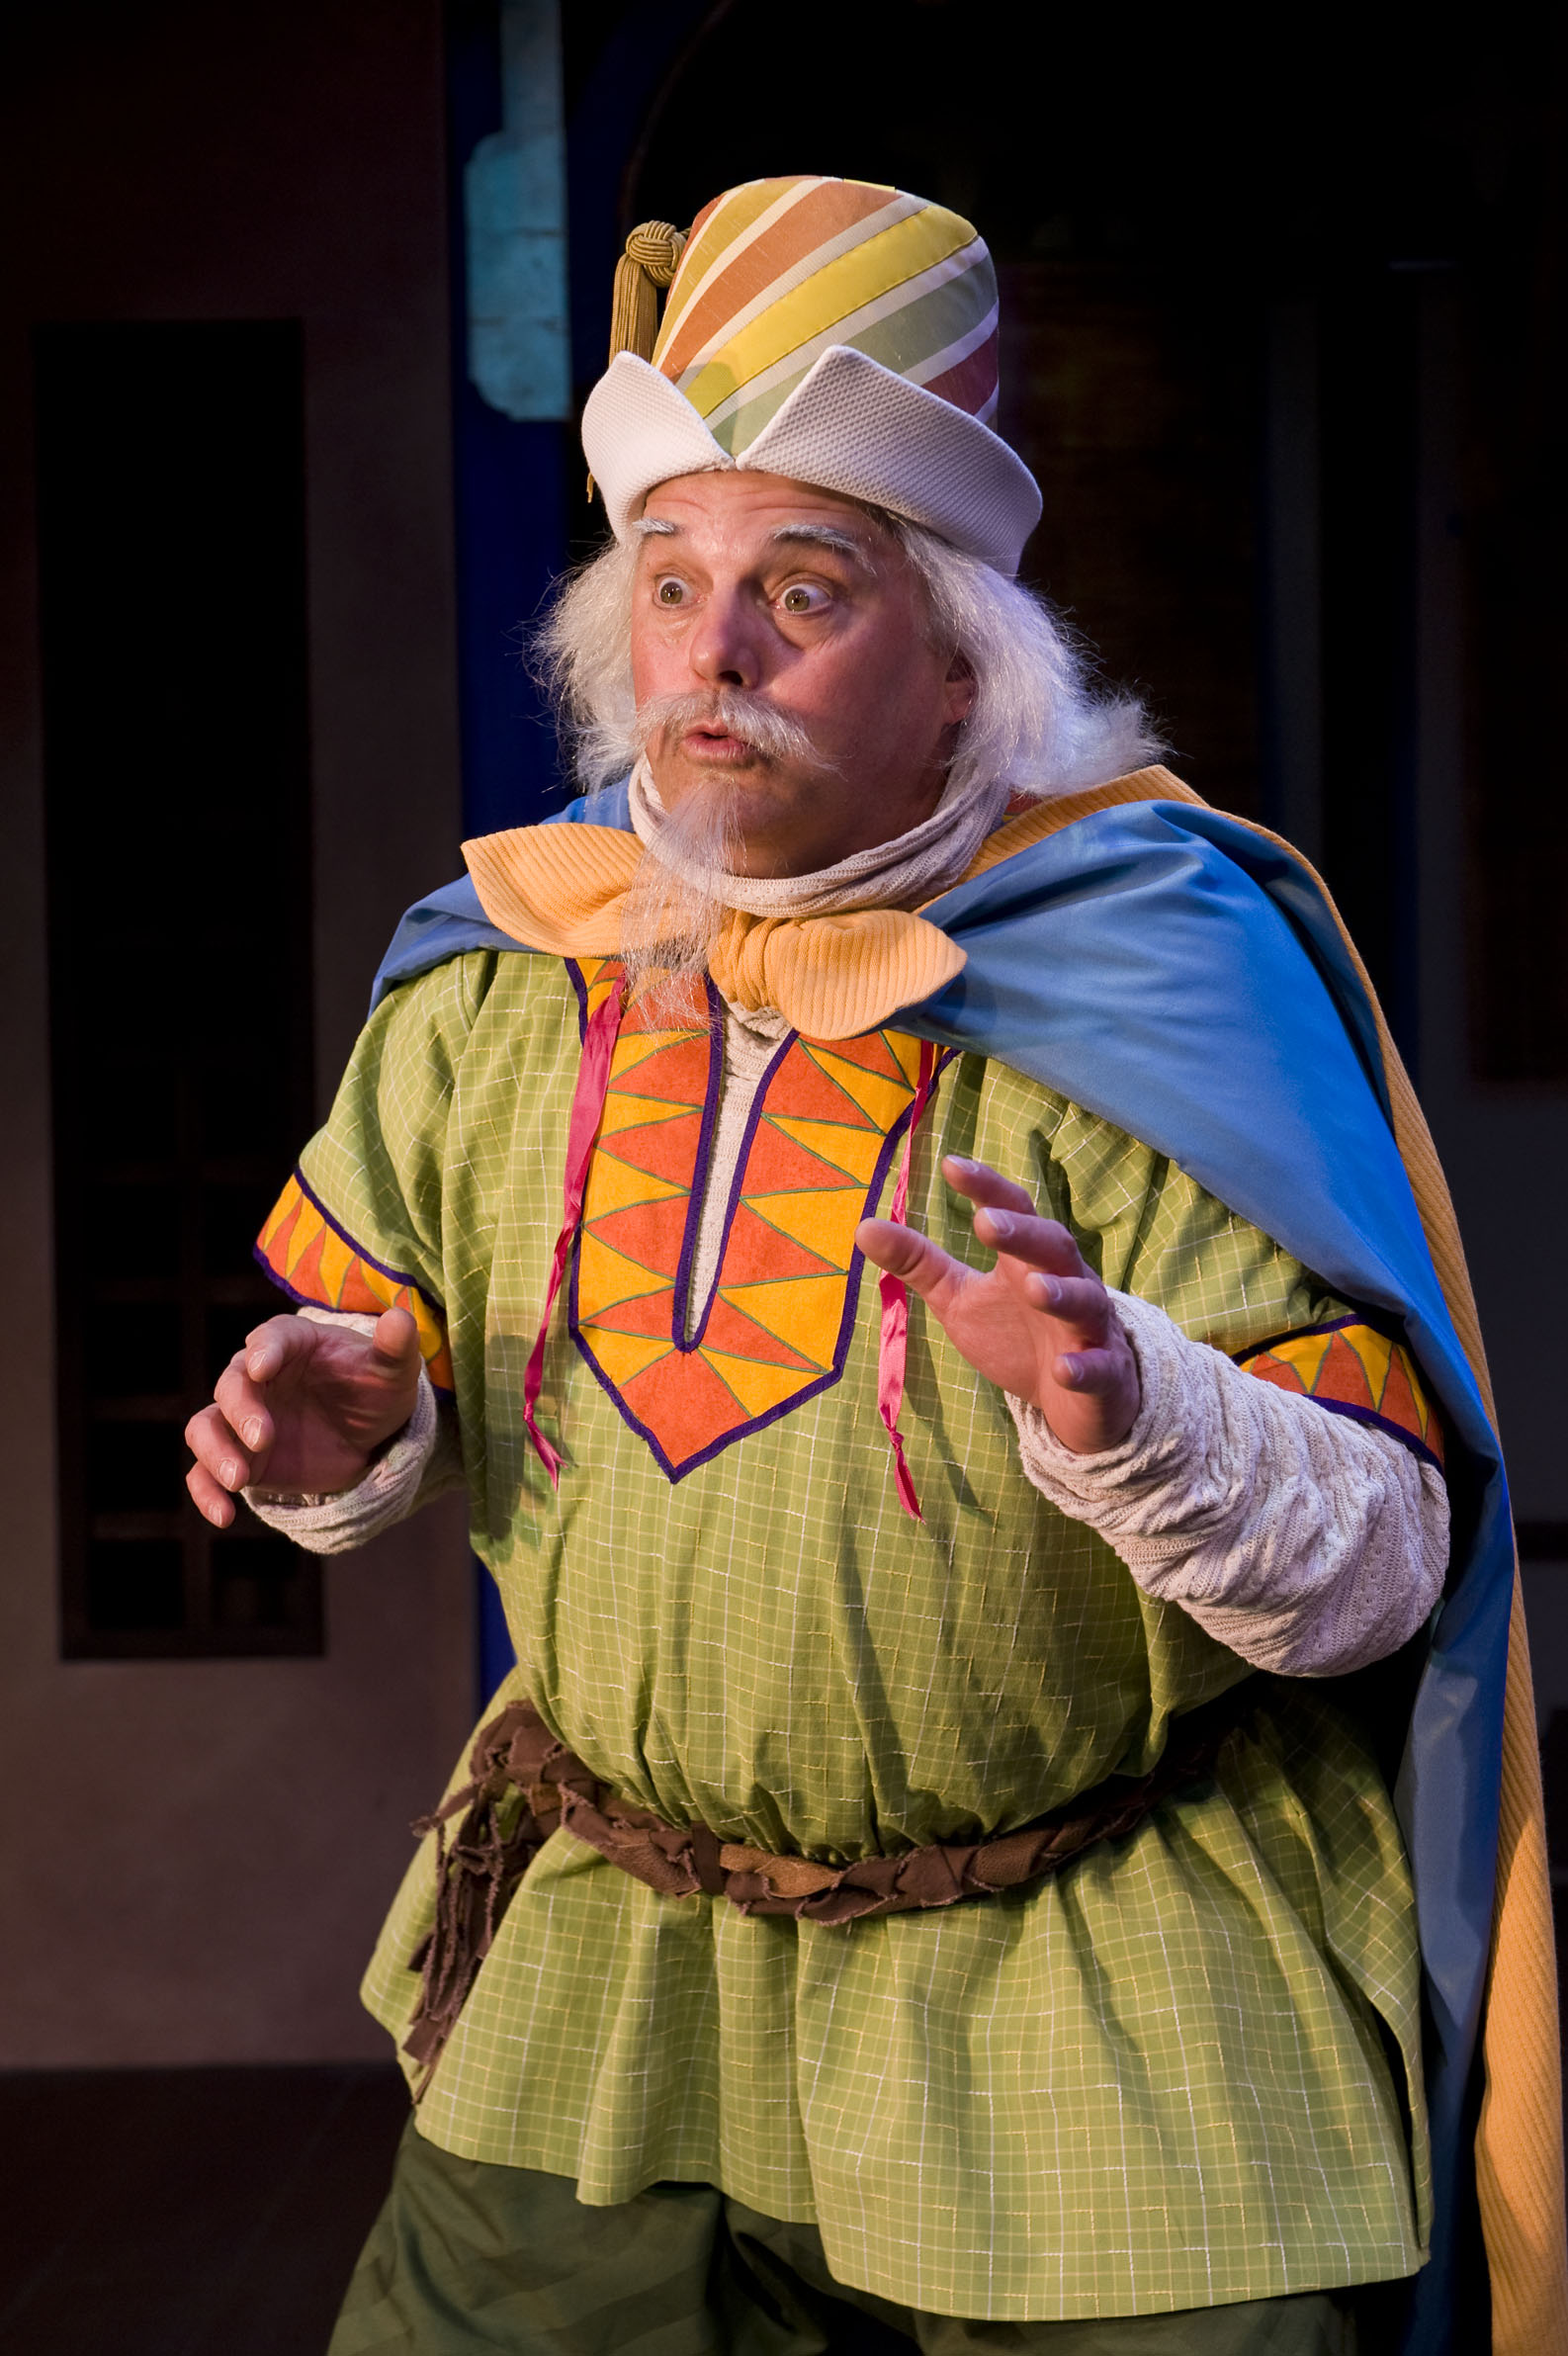 Rick Ford as Dromio of Syracuse at The Utah Shakespearean Festival in a padded suit. Hot!!